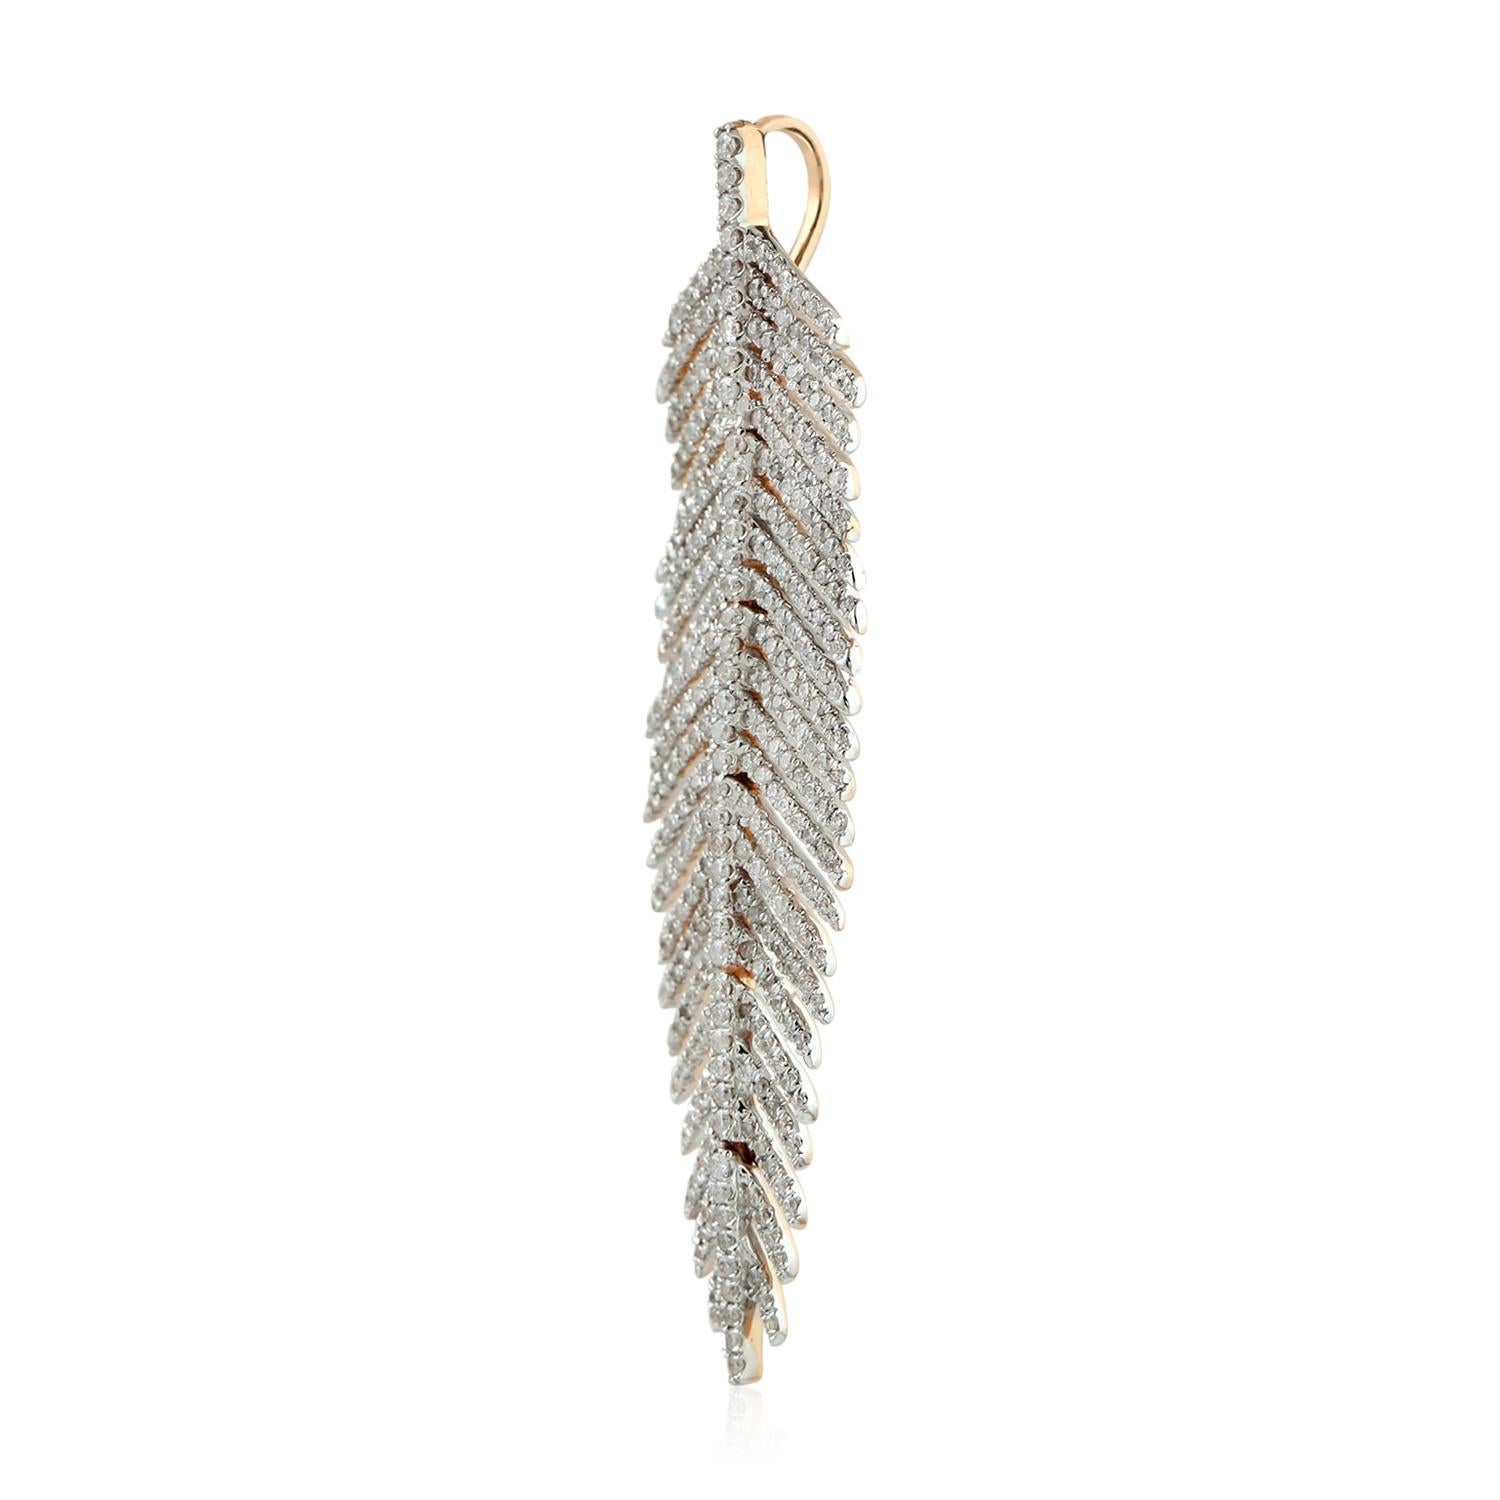 Cast in 18 Karat gold, this beautiful feather pendant is set in 1.5 carats of sparkling diamonds.  Available in white and yellow gold.

FOLLOW  MEGHNA JEWELS storefront to view the latest collection & exclusive pieces.  Meghna Jewels is proudly